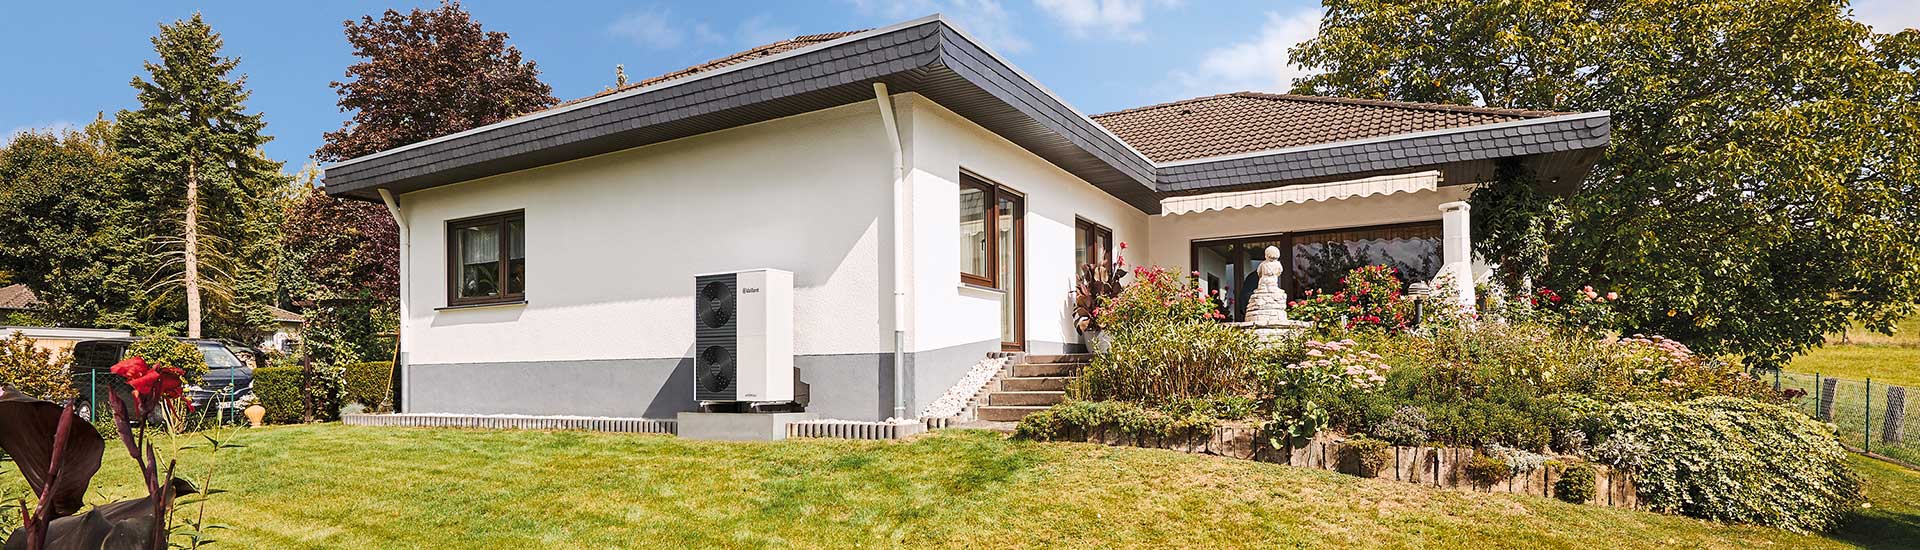 white-painted-bungalow-with-vailliant-heat-pump